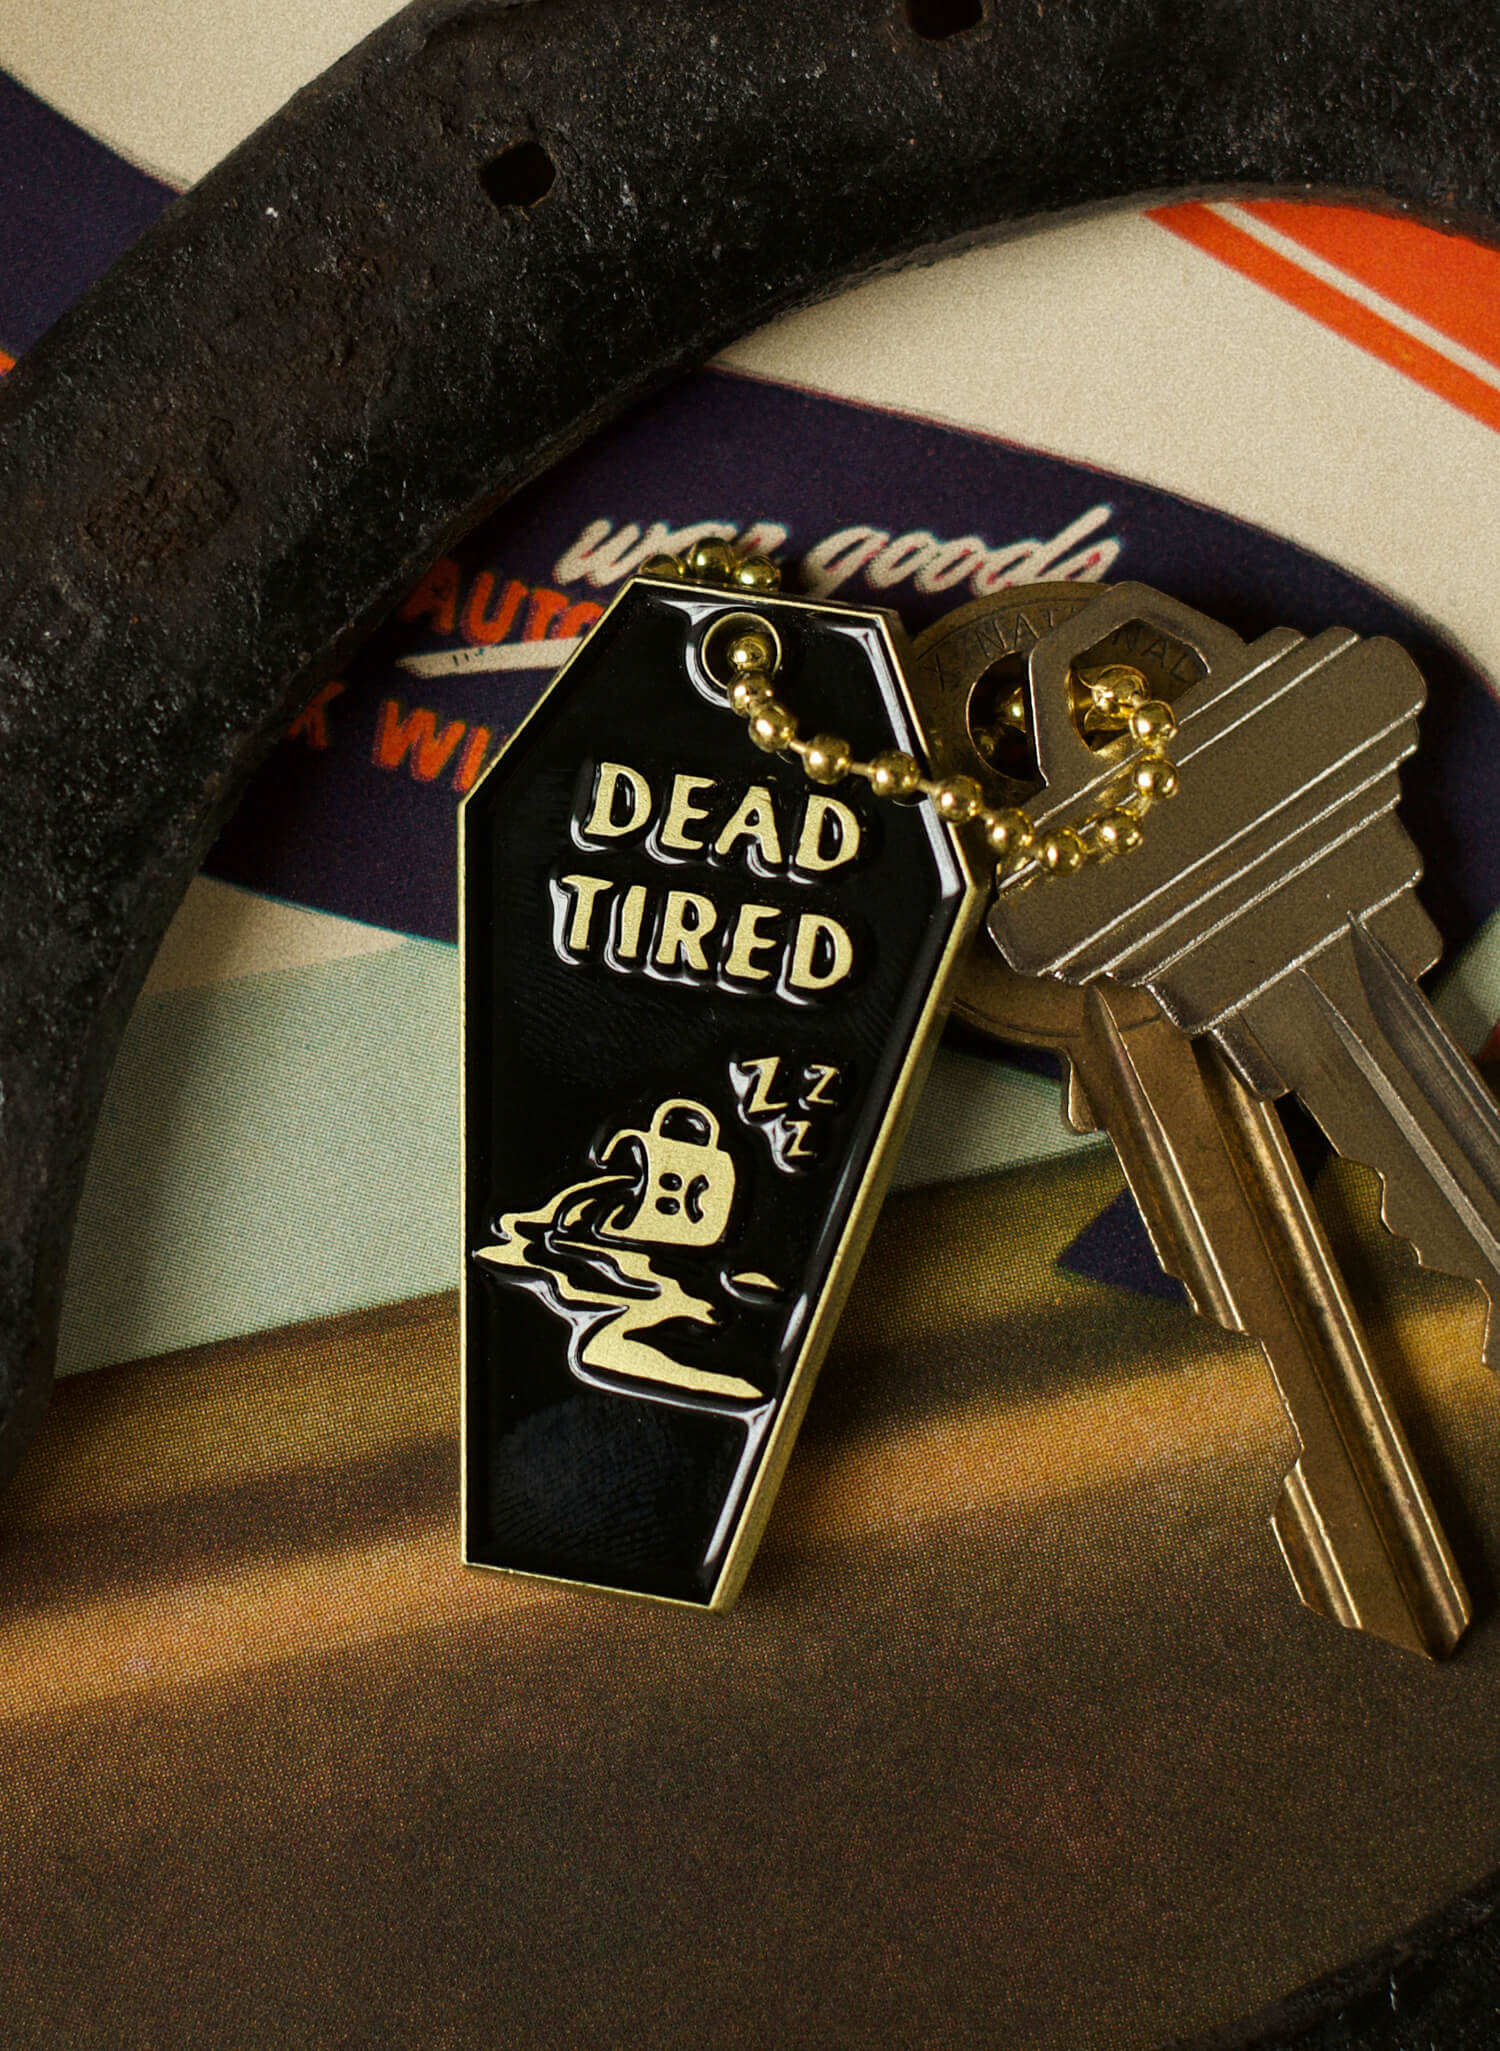 Dead Tired Coffee Breakfast Club Diner Mug Tired Mom Vintage Brass Keychain Keytag Best Coffee Gift for Tired Mom Dad Motorcycle